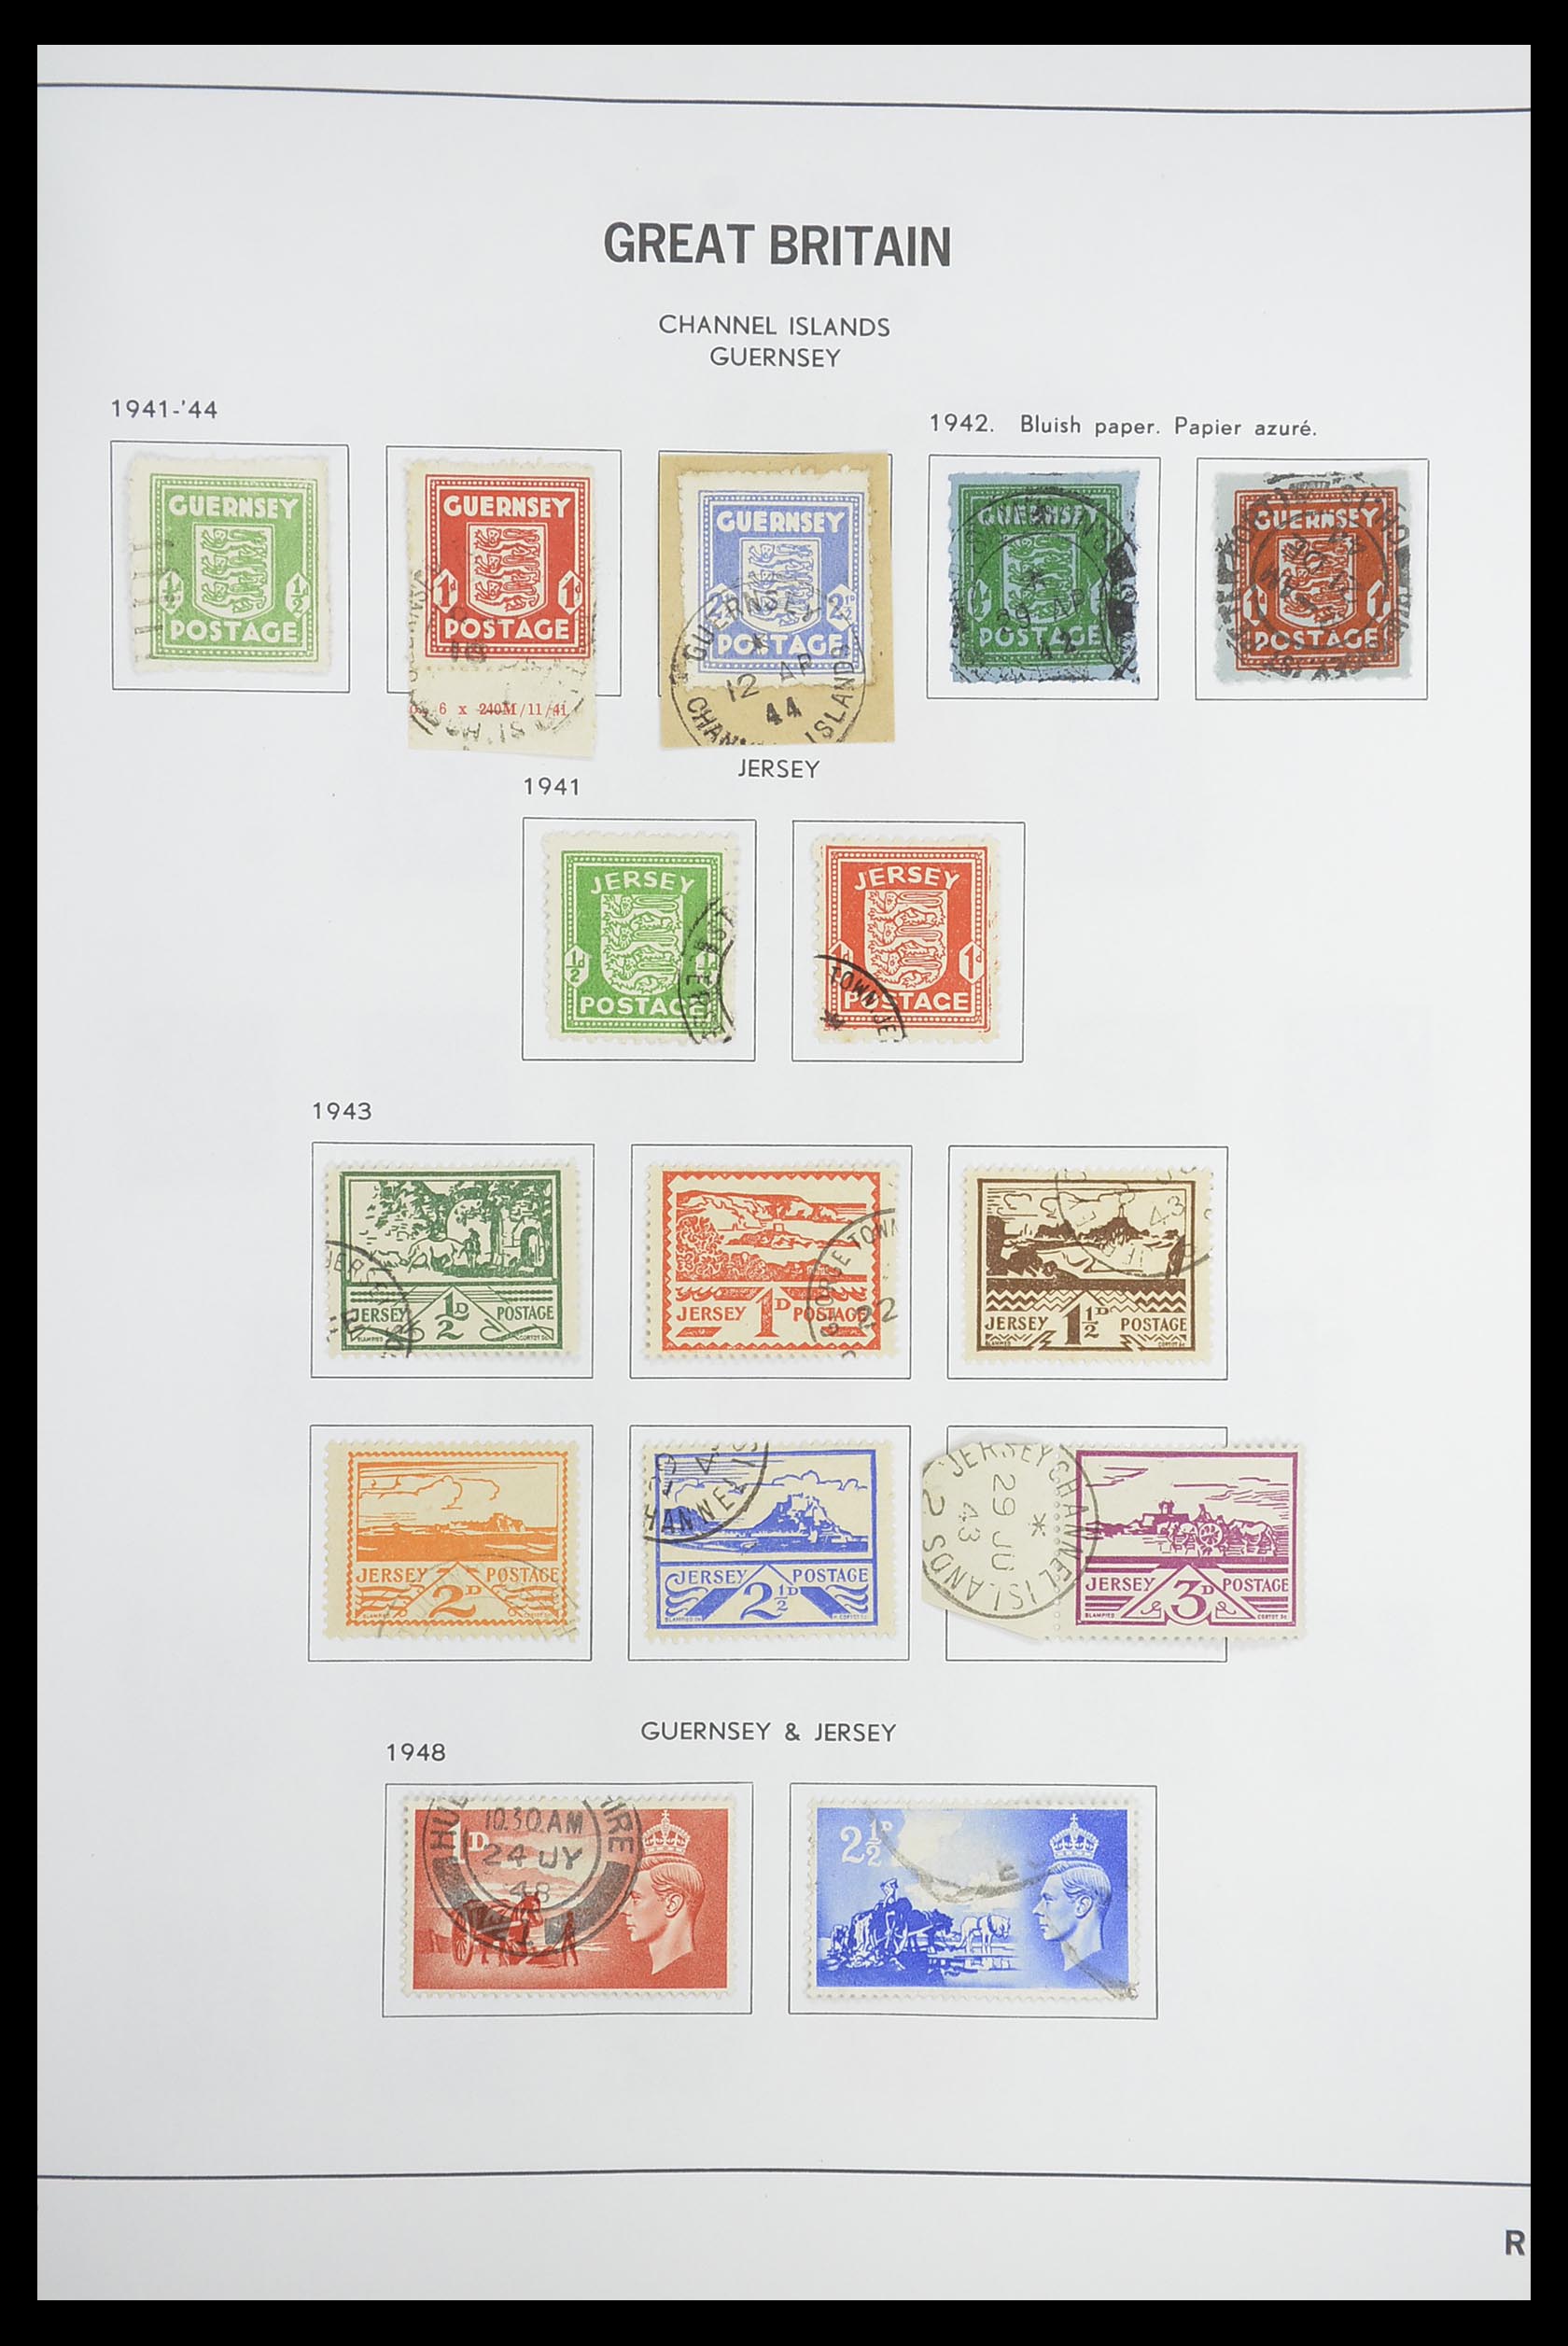 33898 119 - Stamp collection 33898 Great Britain 1840-2006.